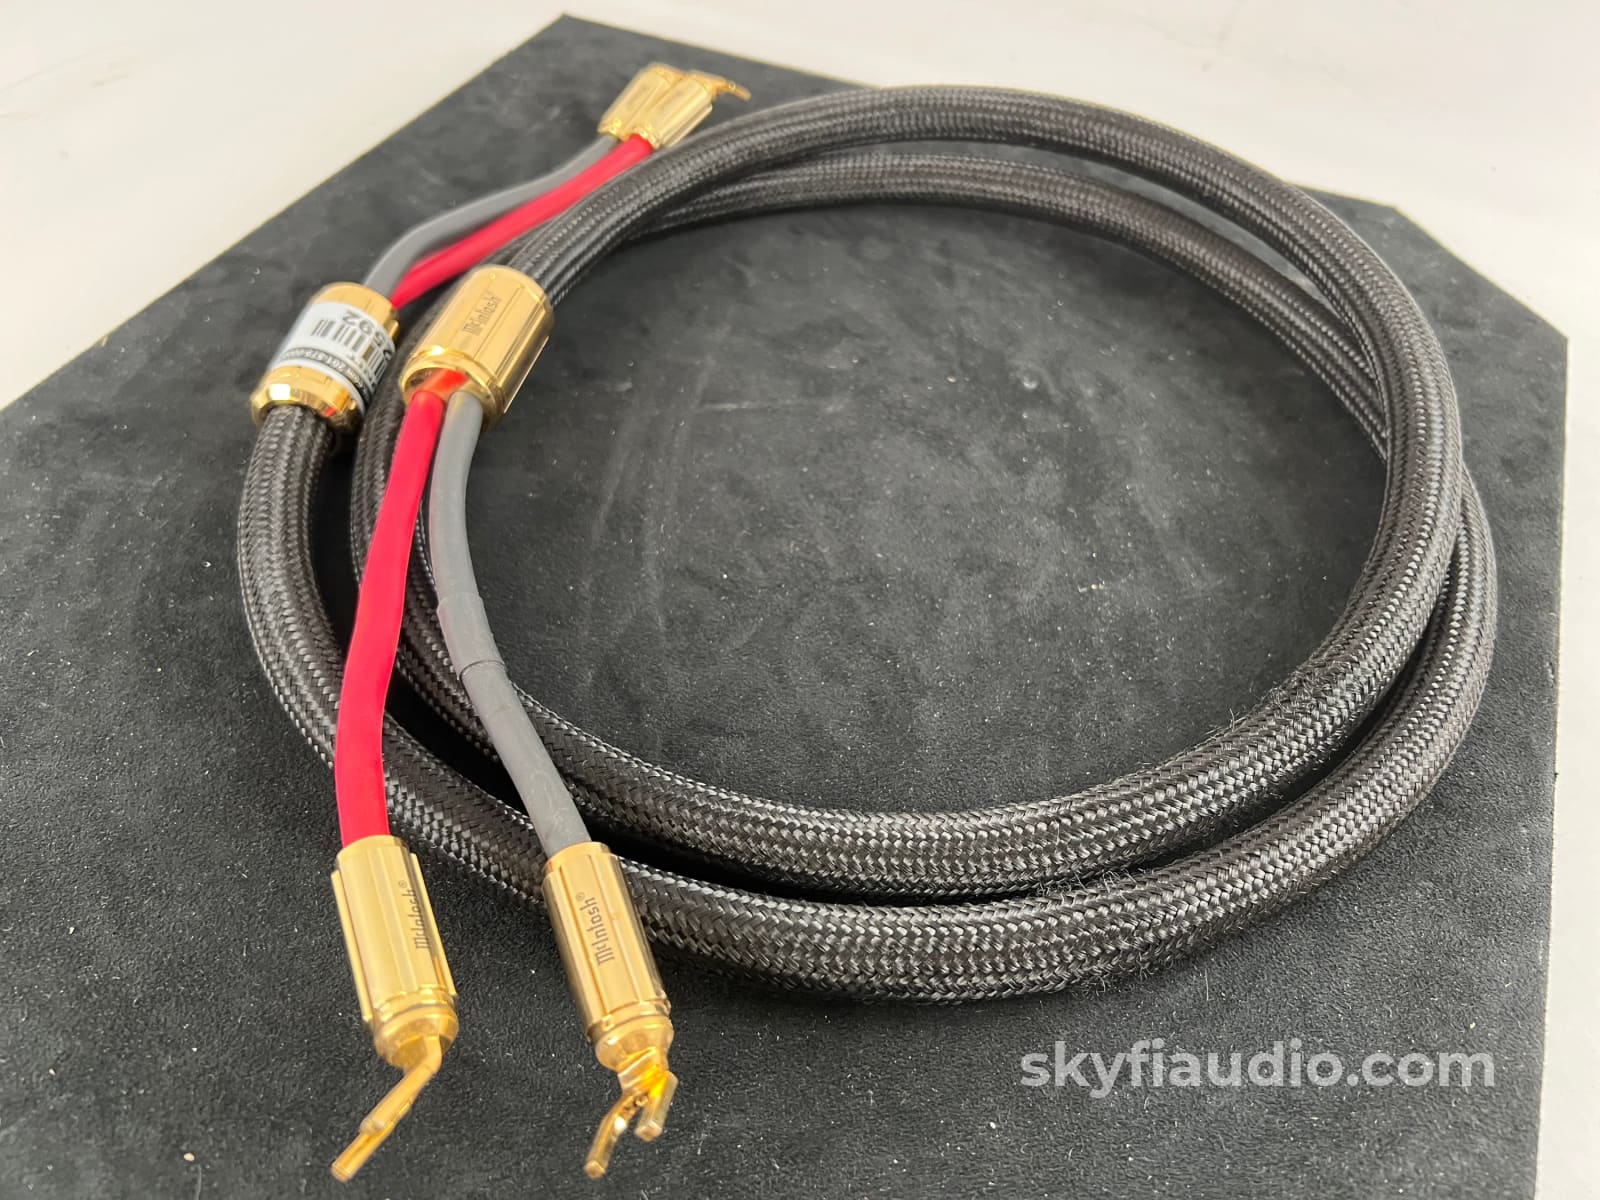 Mcintosh Speaker Cable (Single) W/Spades - 2M In Store Only Cables